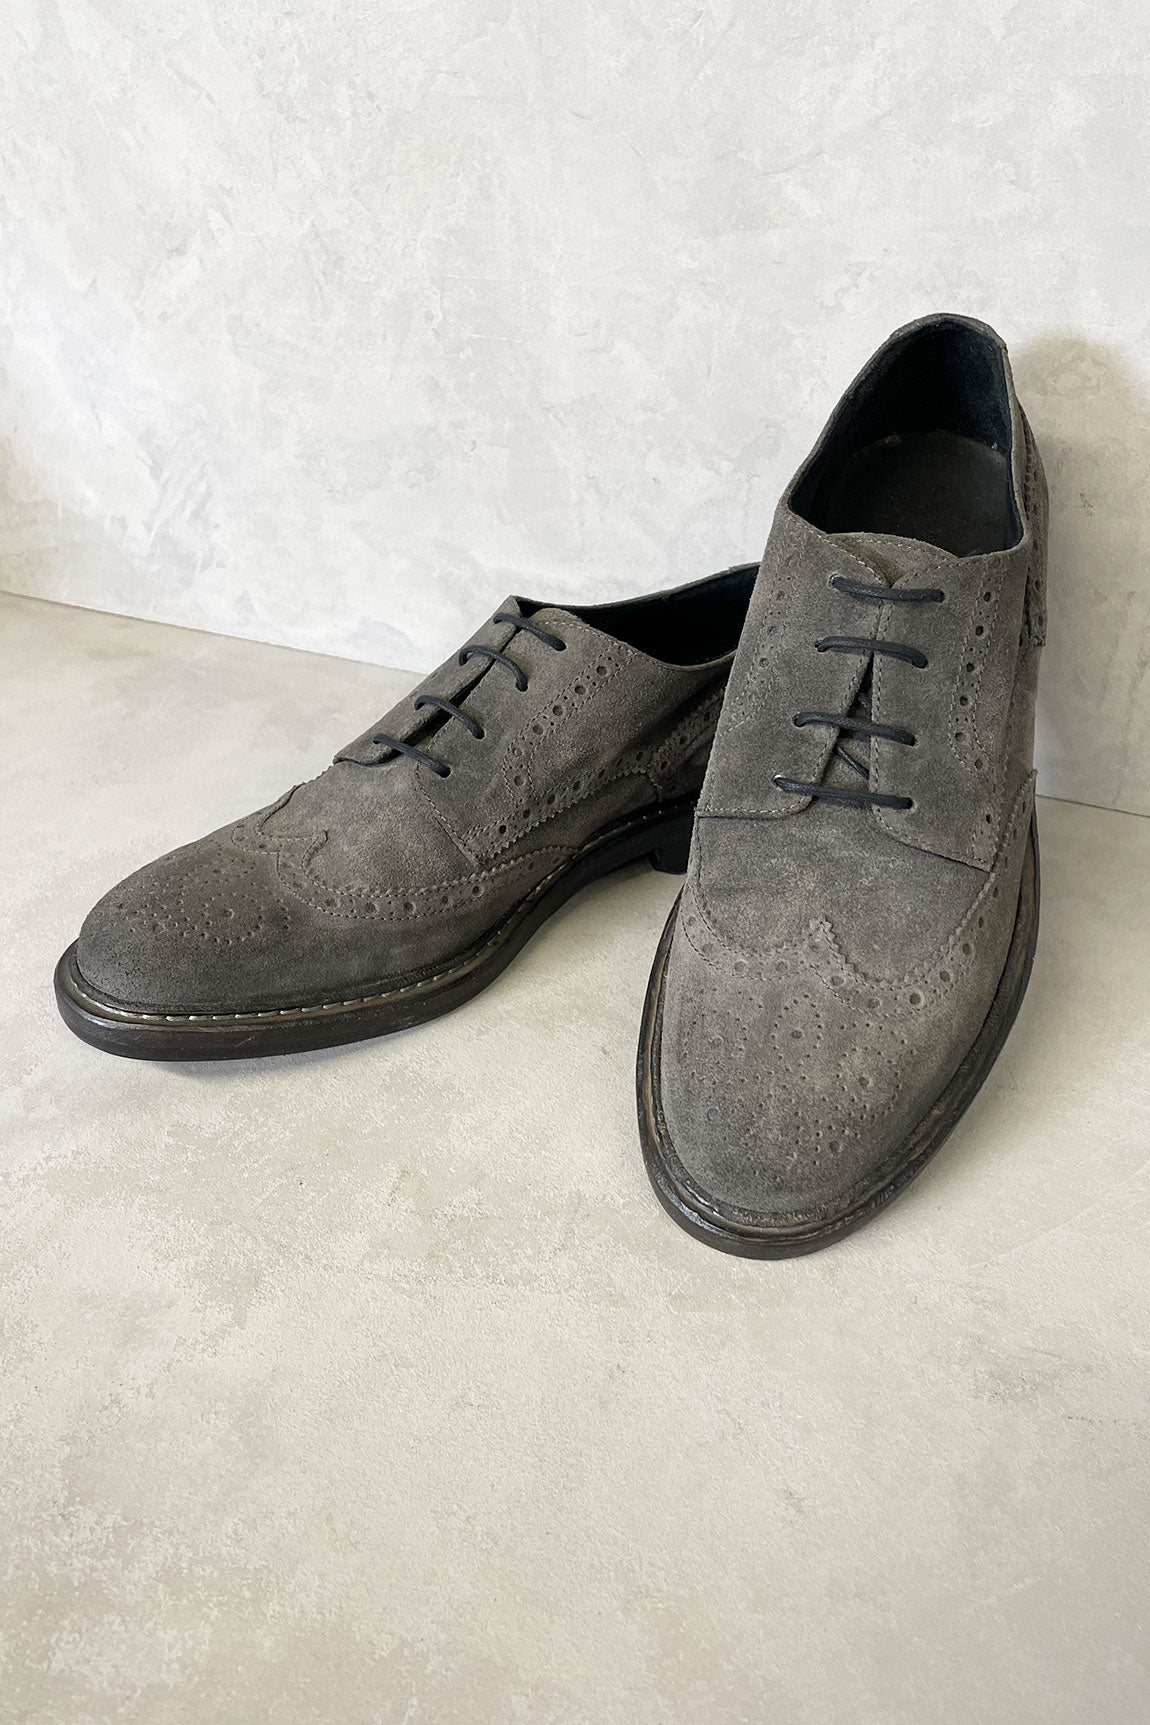 English lace-up shoes for men with dovetail. HND 17 M681-32/BLACKBOARD